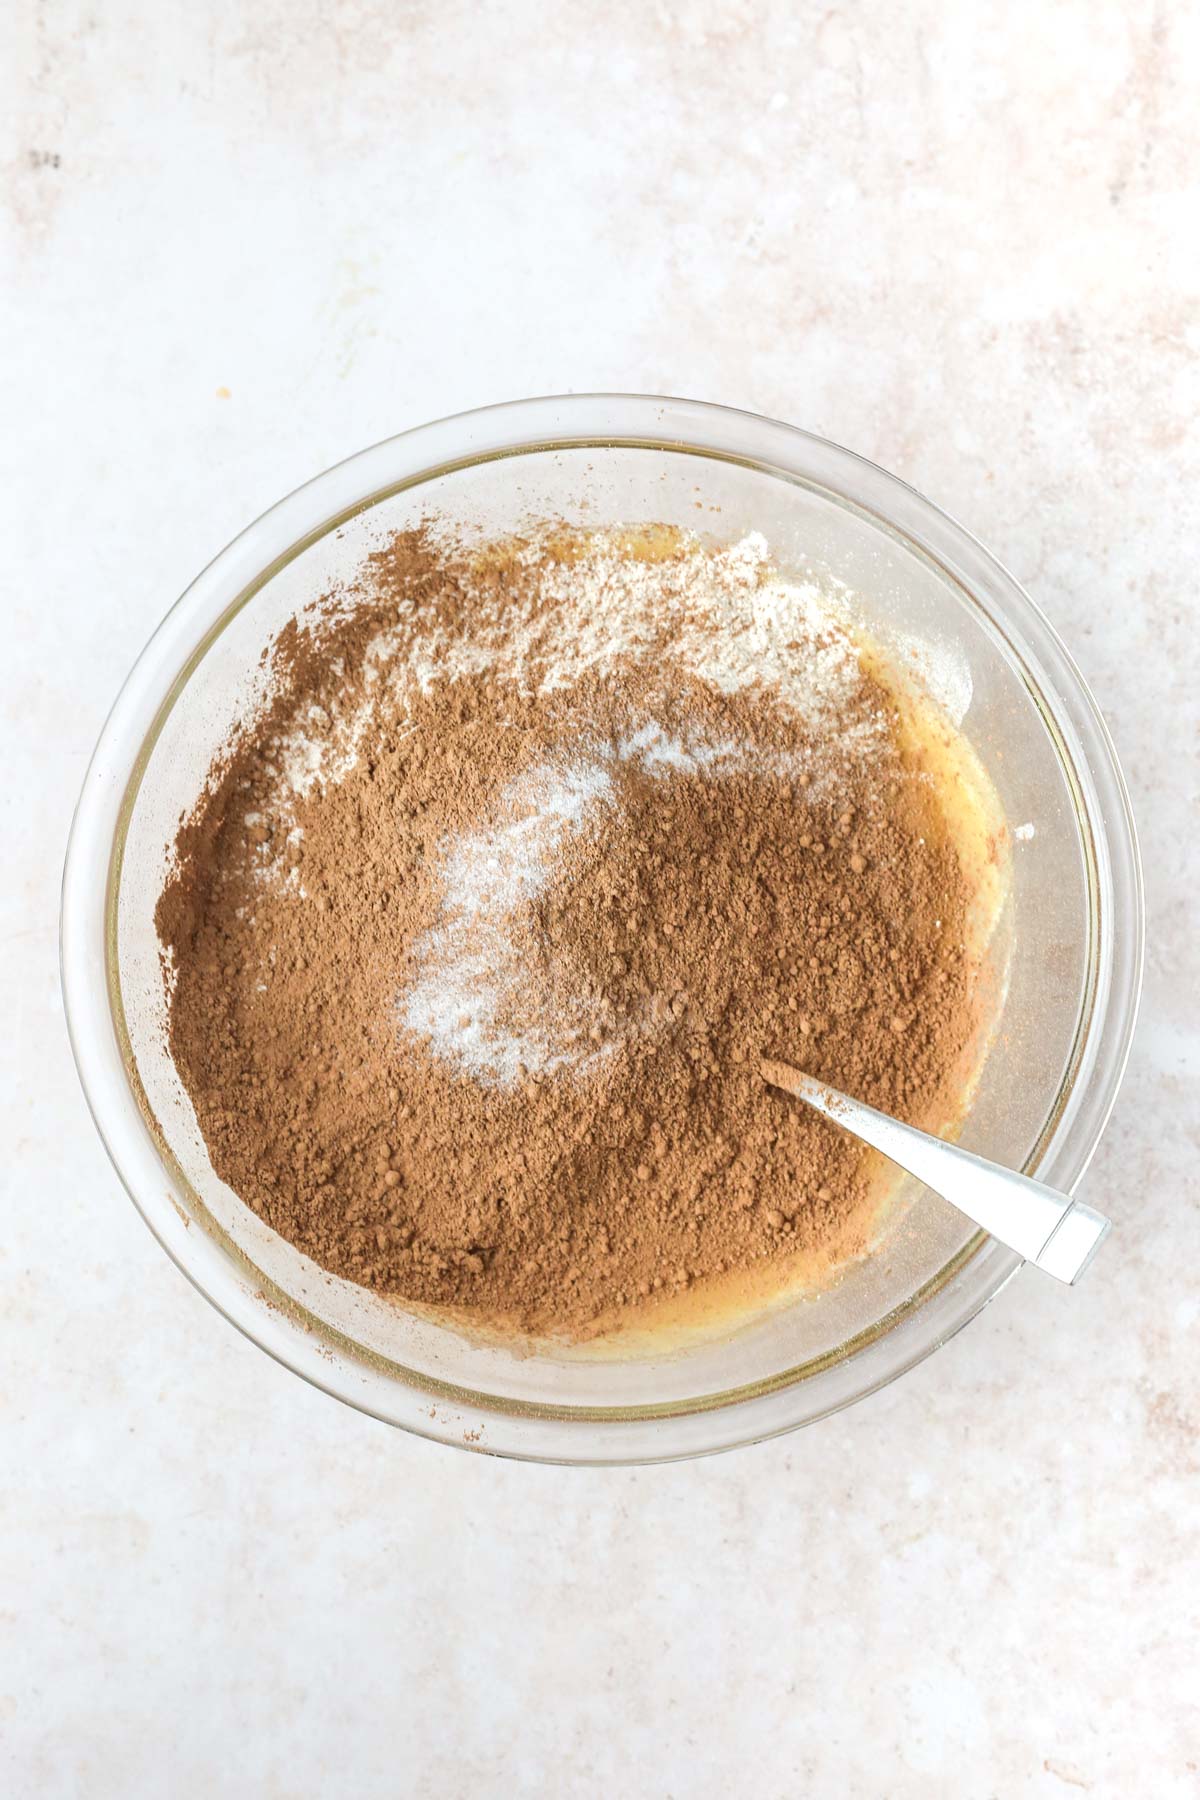 Cocoa powder and flour in a large mixing bowl with a spoon.